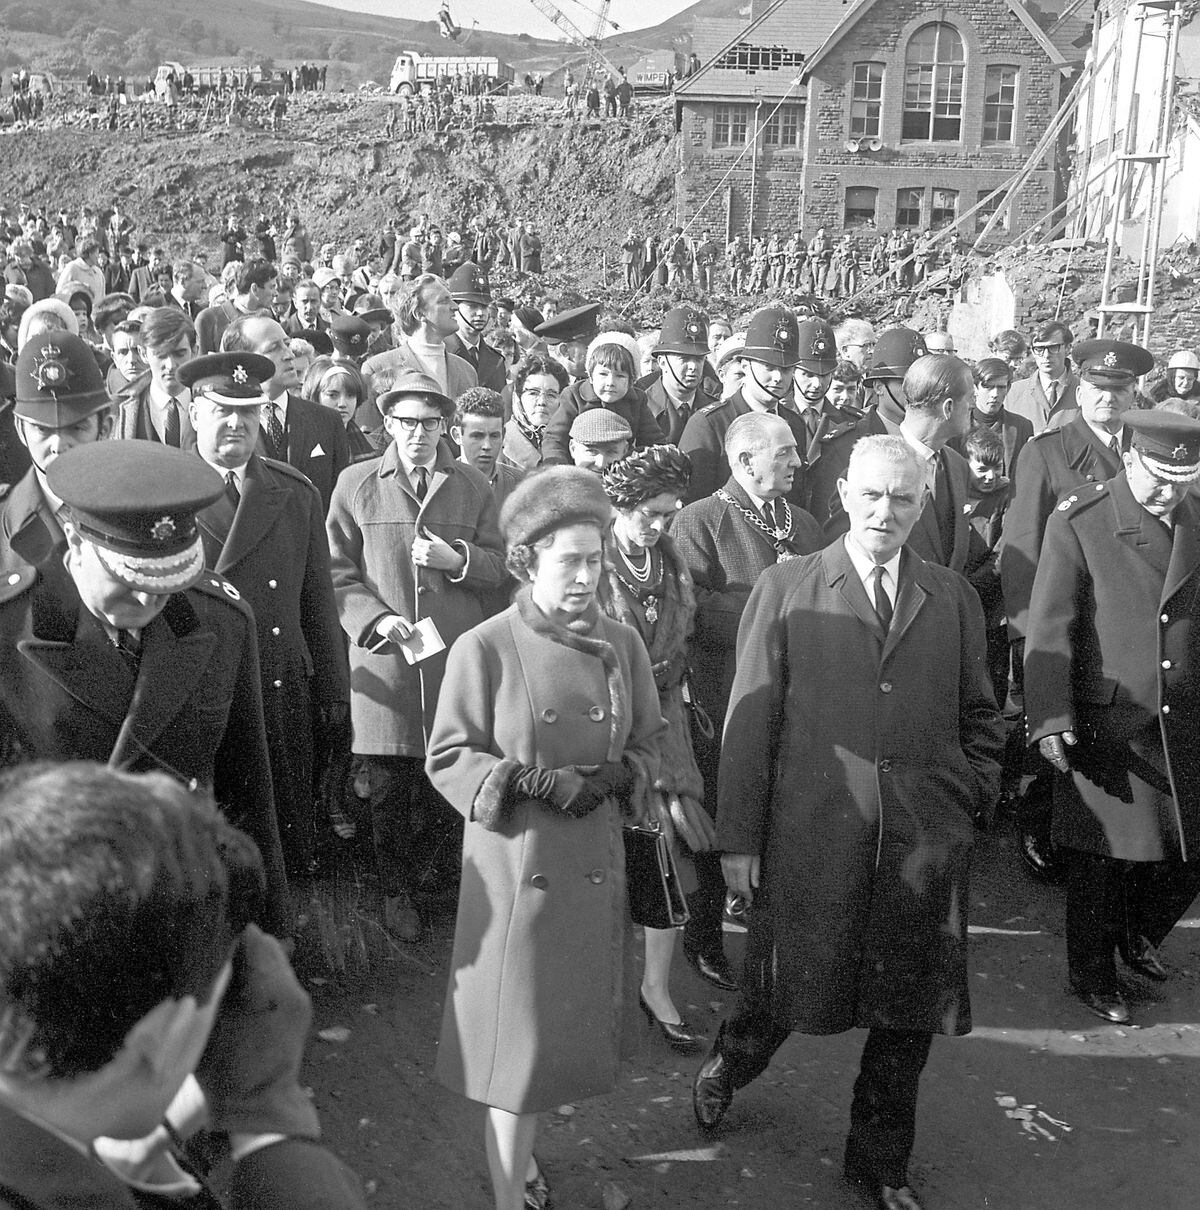 Queen Elizabeth II and the Duke of Edinburgh (head turned, right) on the site of the tragic Pantglas Junior School, during their visit to devastated Aberfan, South Wales. Right of the Queen is Councillor Jim Williams, who lost seven members of his family in the coal-tip disaster